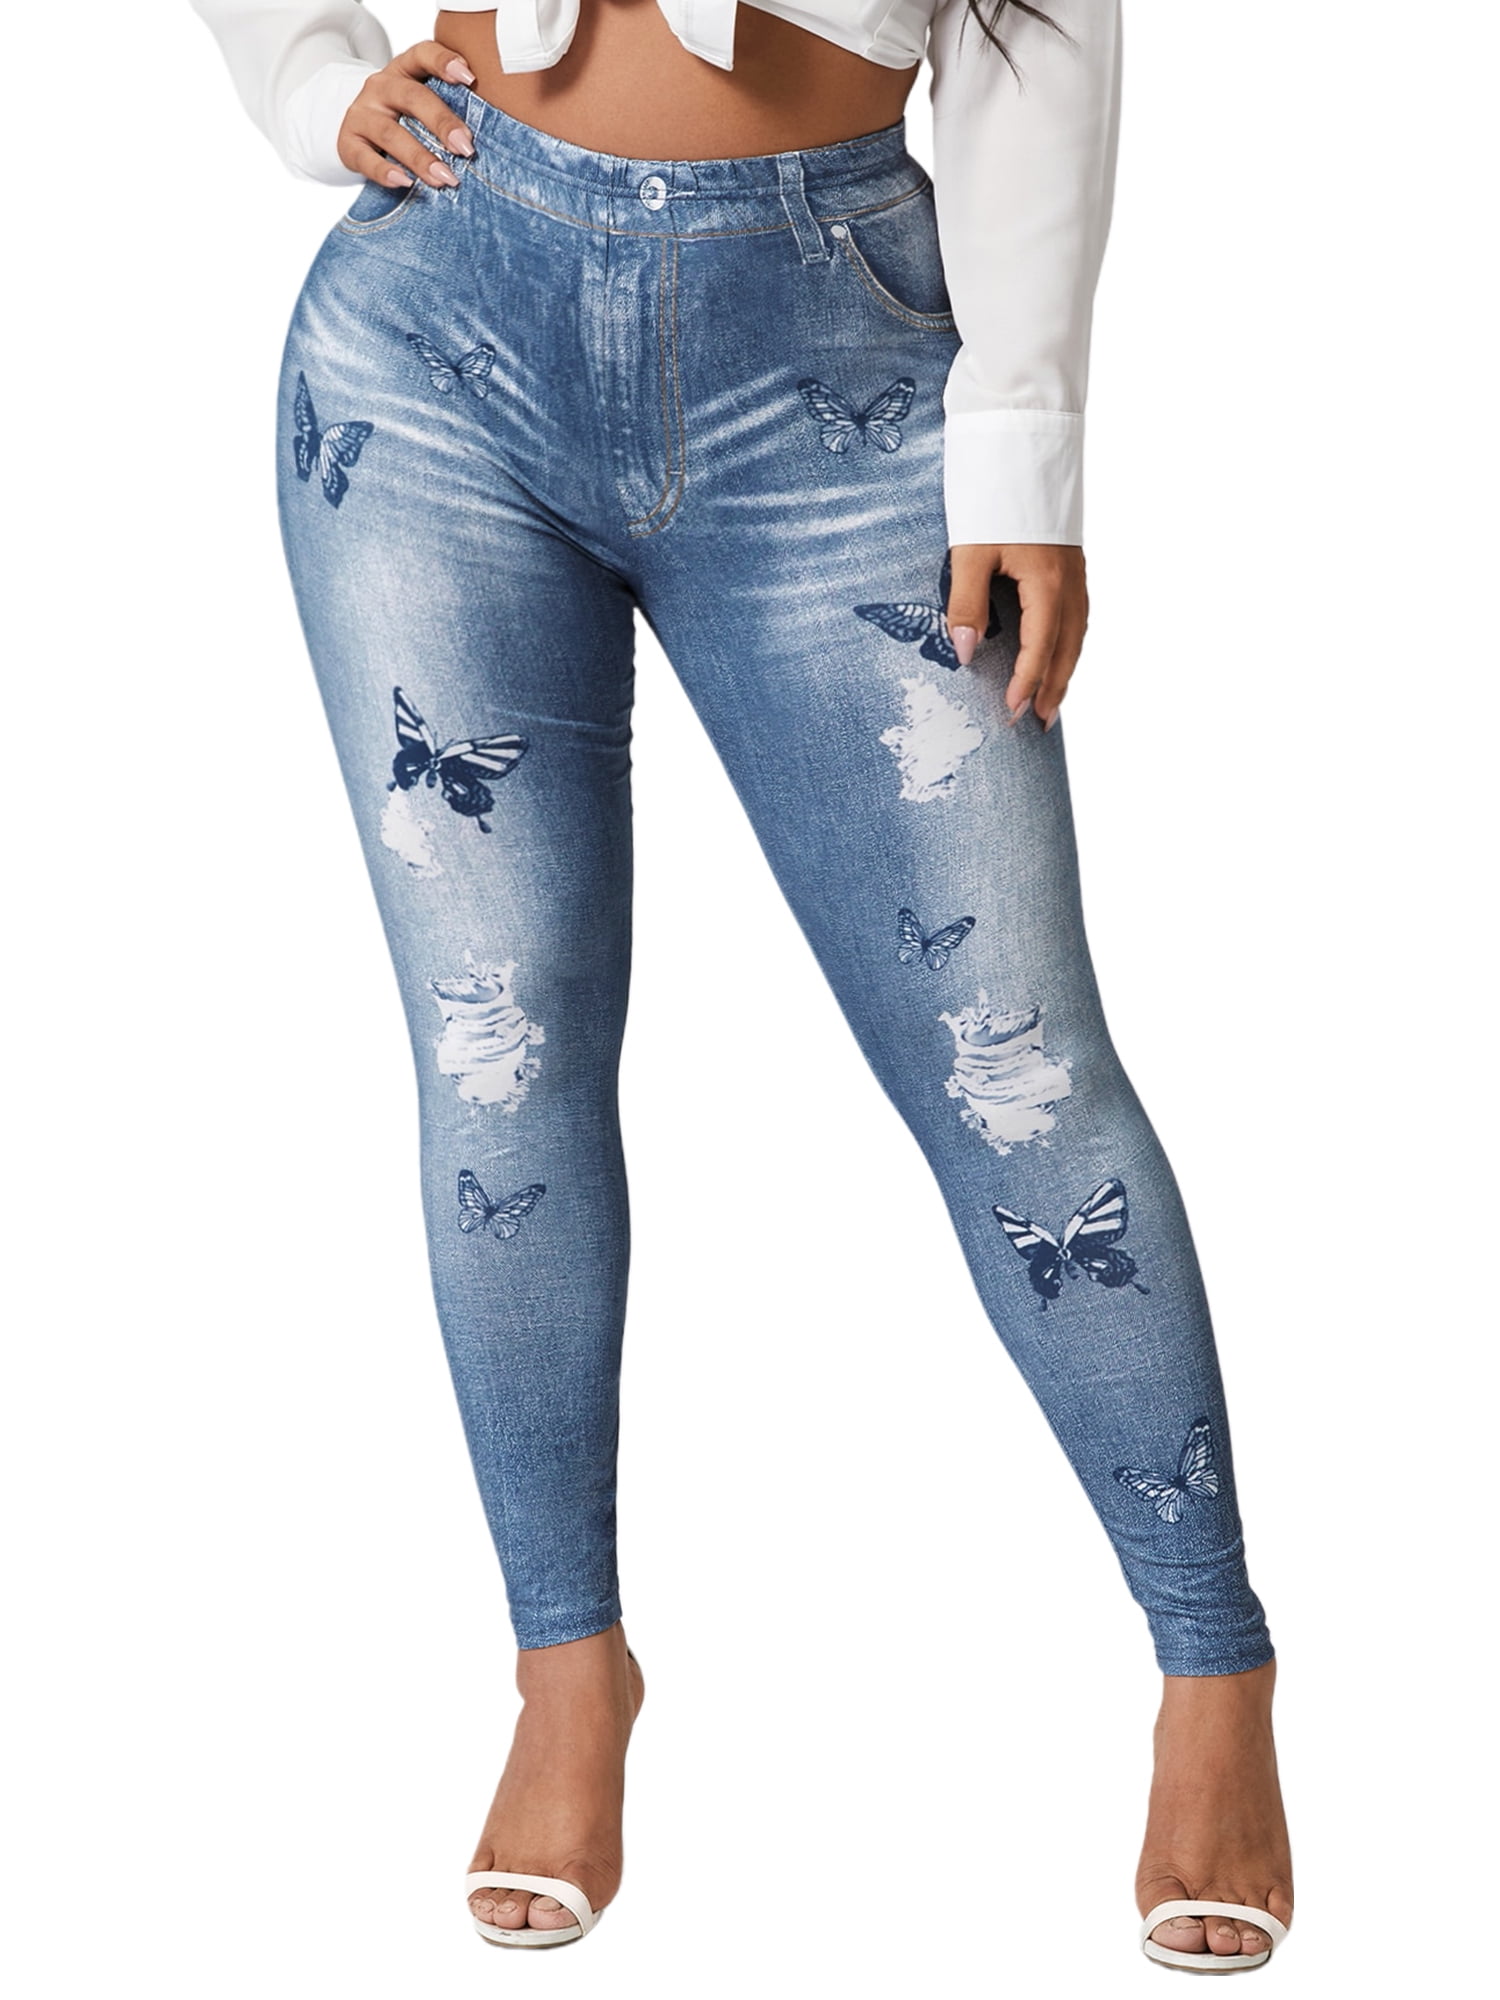 Frontwalk Jean Leggings for Women Plus Size Butterfly Printed Fake Denim  High Waisted Yoga Pants Stretch Faux Jean Look Jeggings Tights Light Blue  5XL